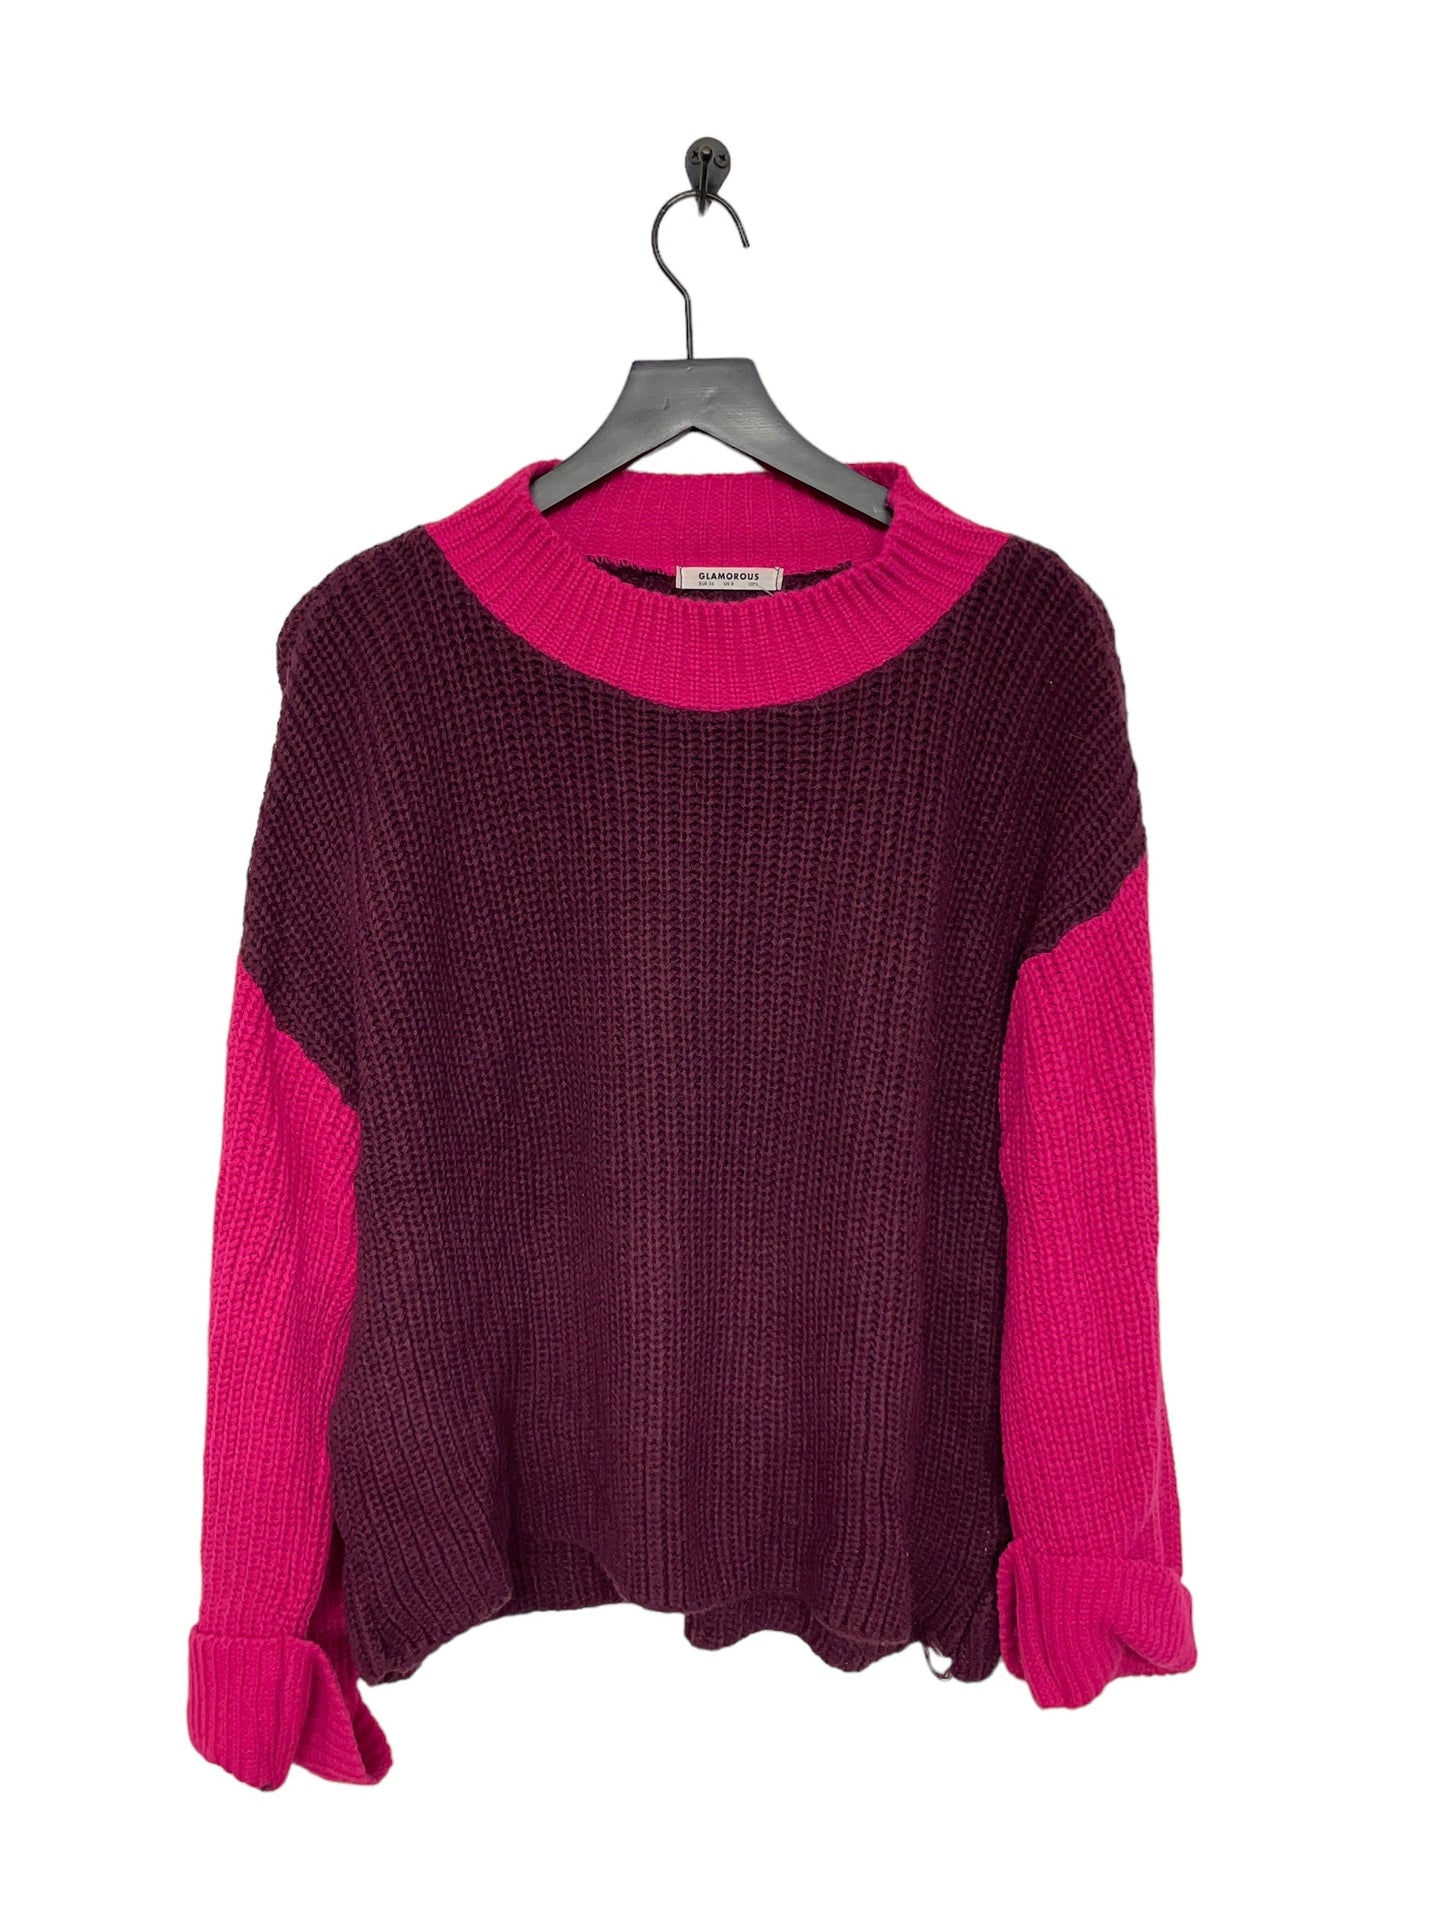 Plum Sweater Clothes Mentor, Size S